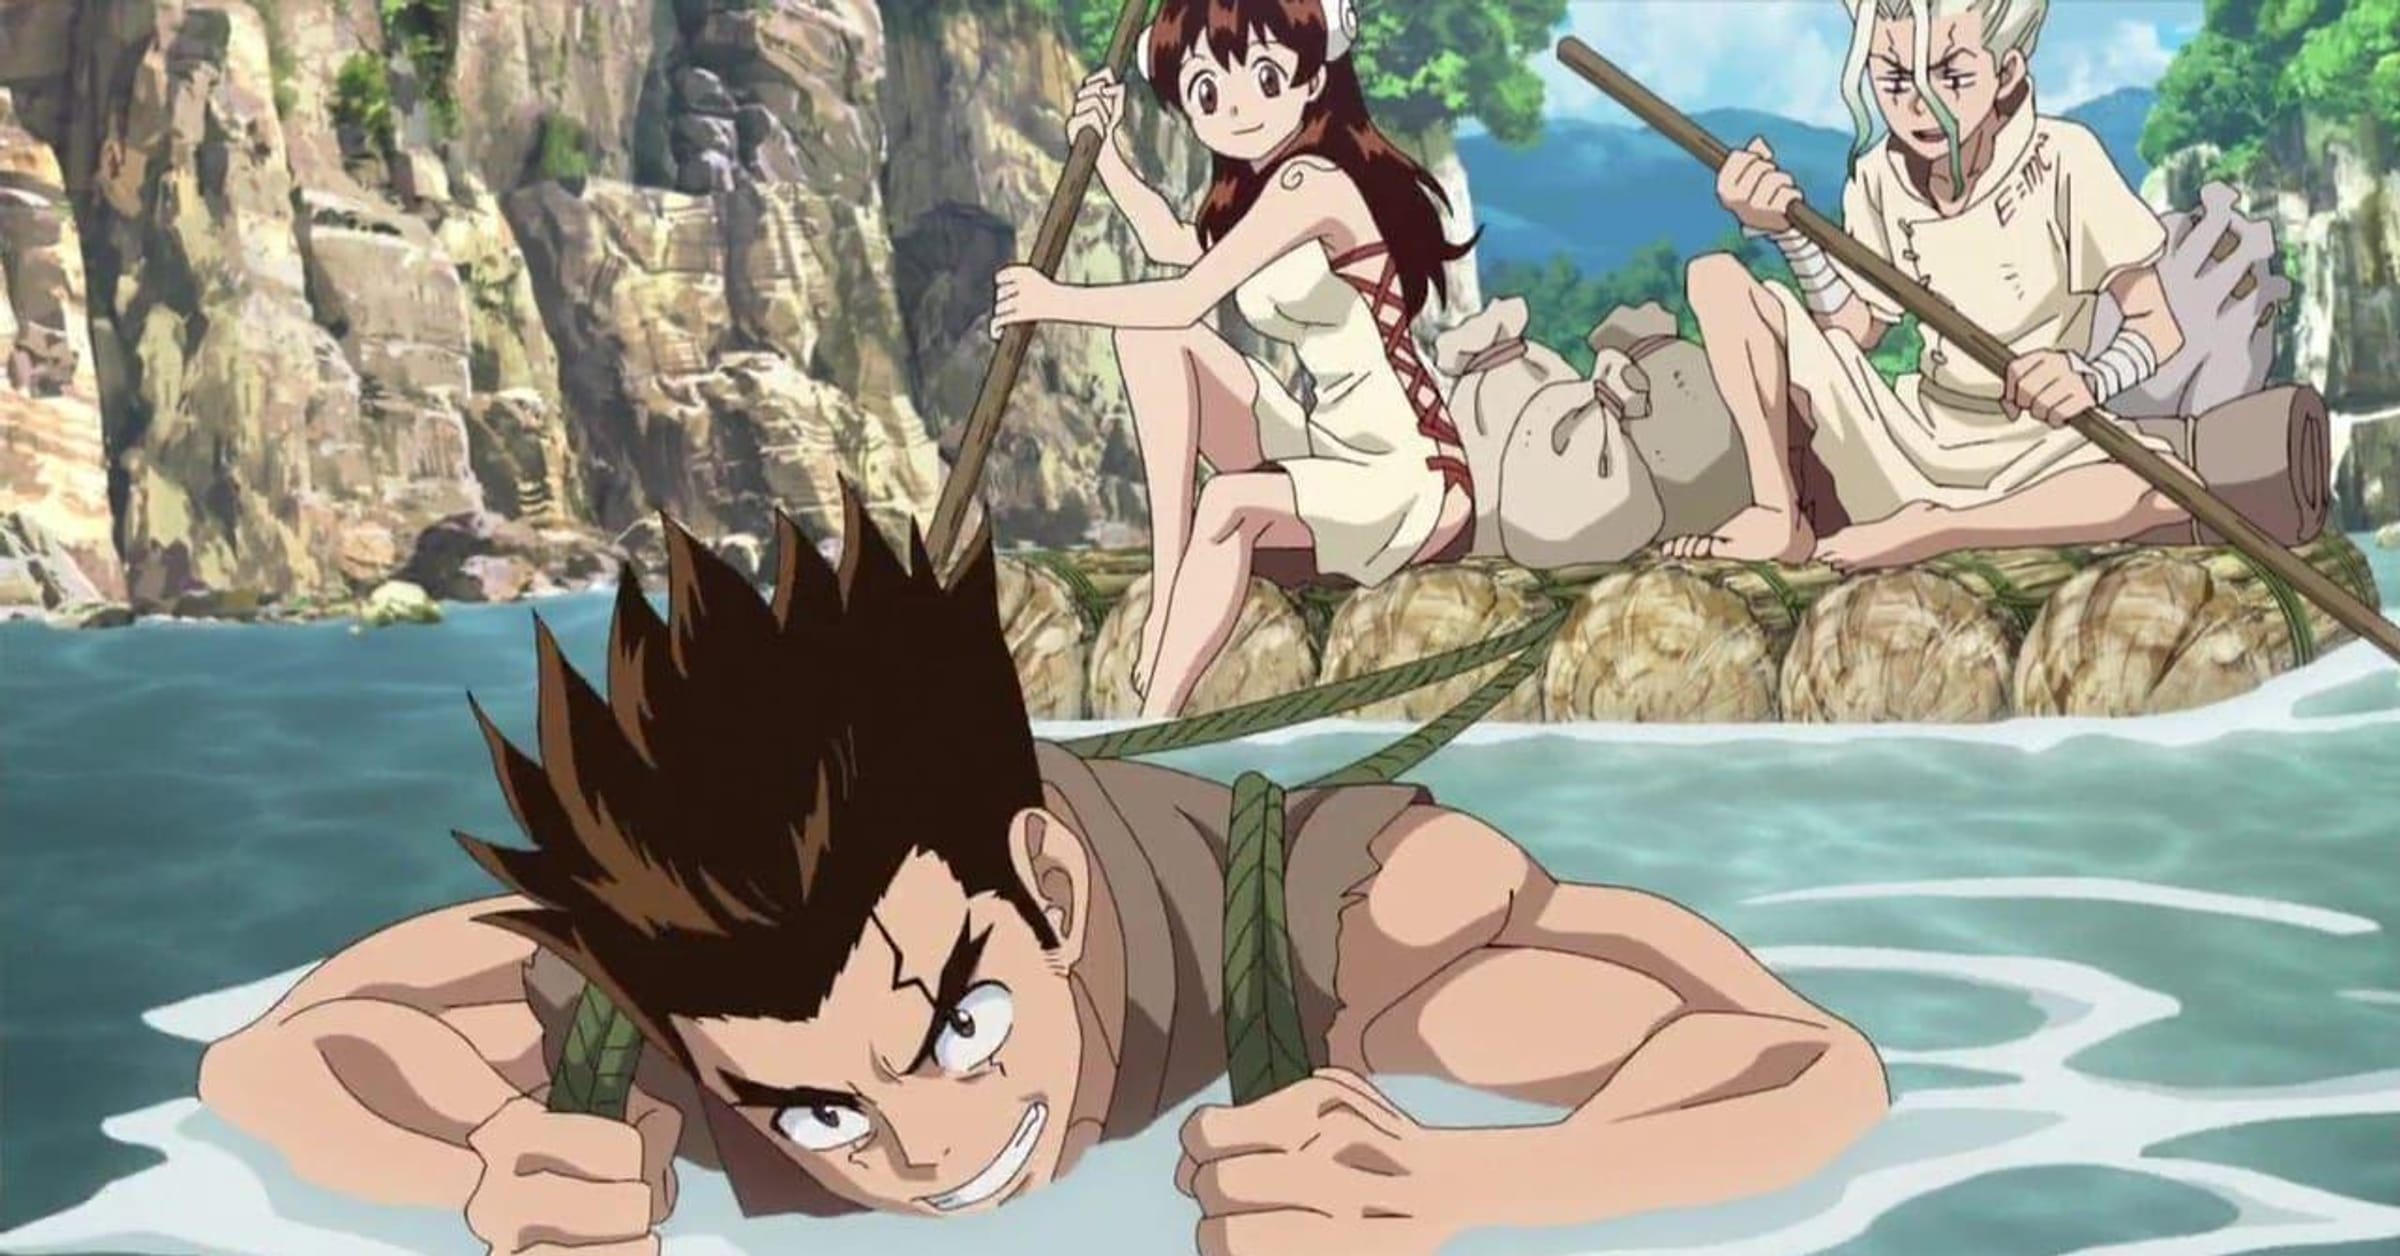 Dr. Stone: New World Episode 10 Review - I drink and watch anime